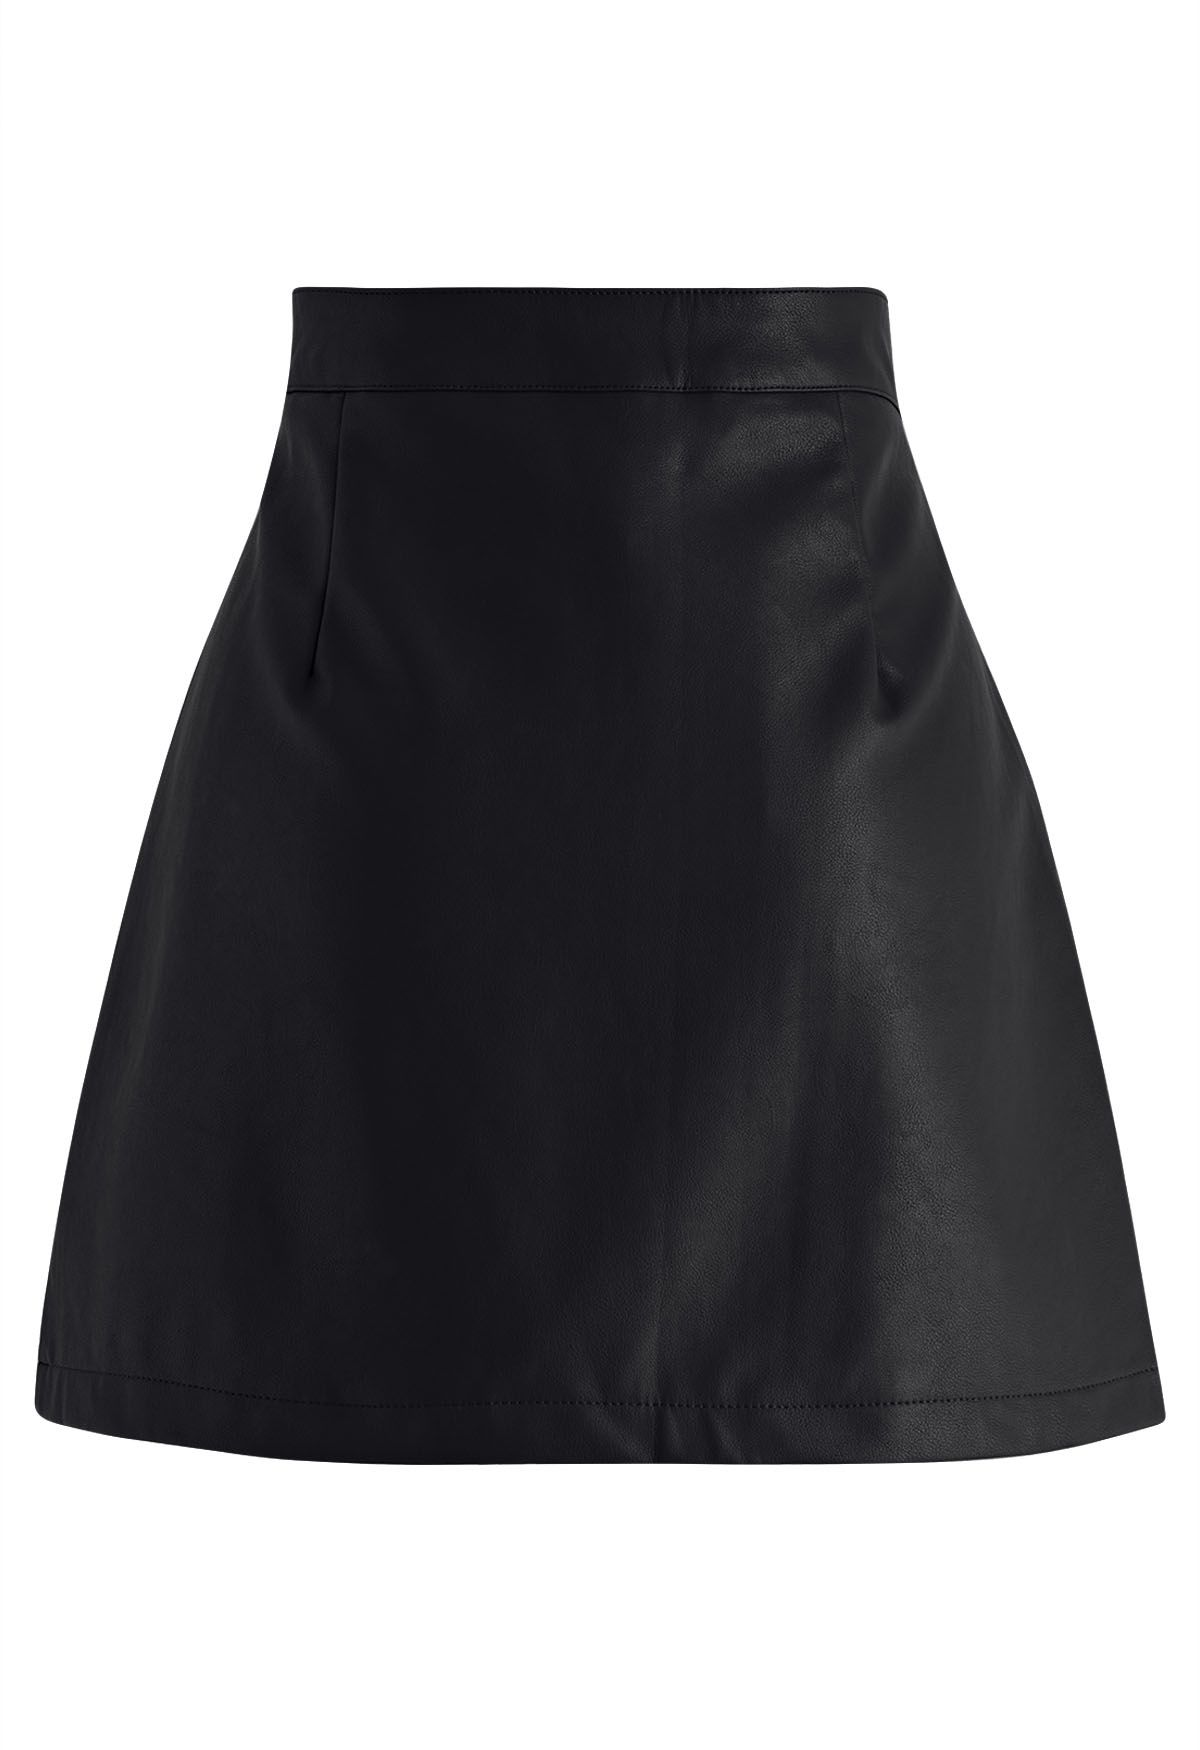 Two-Tone Faux Leather Mini Bud Skirt in Black